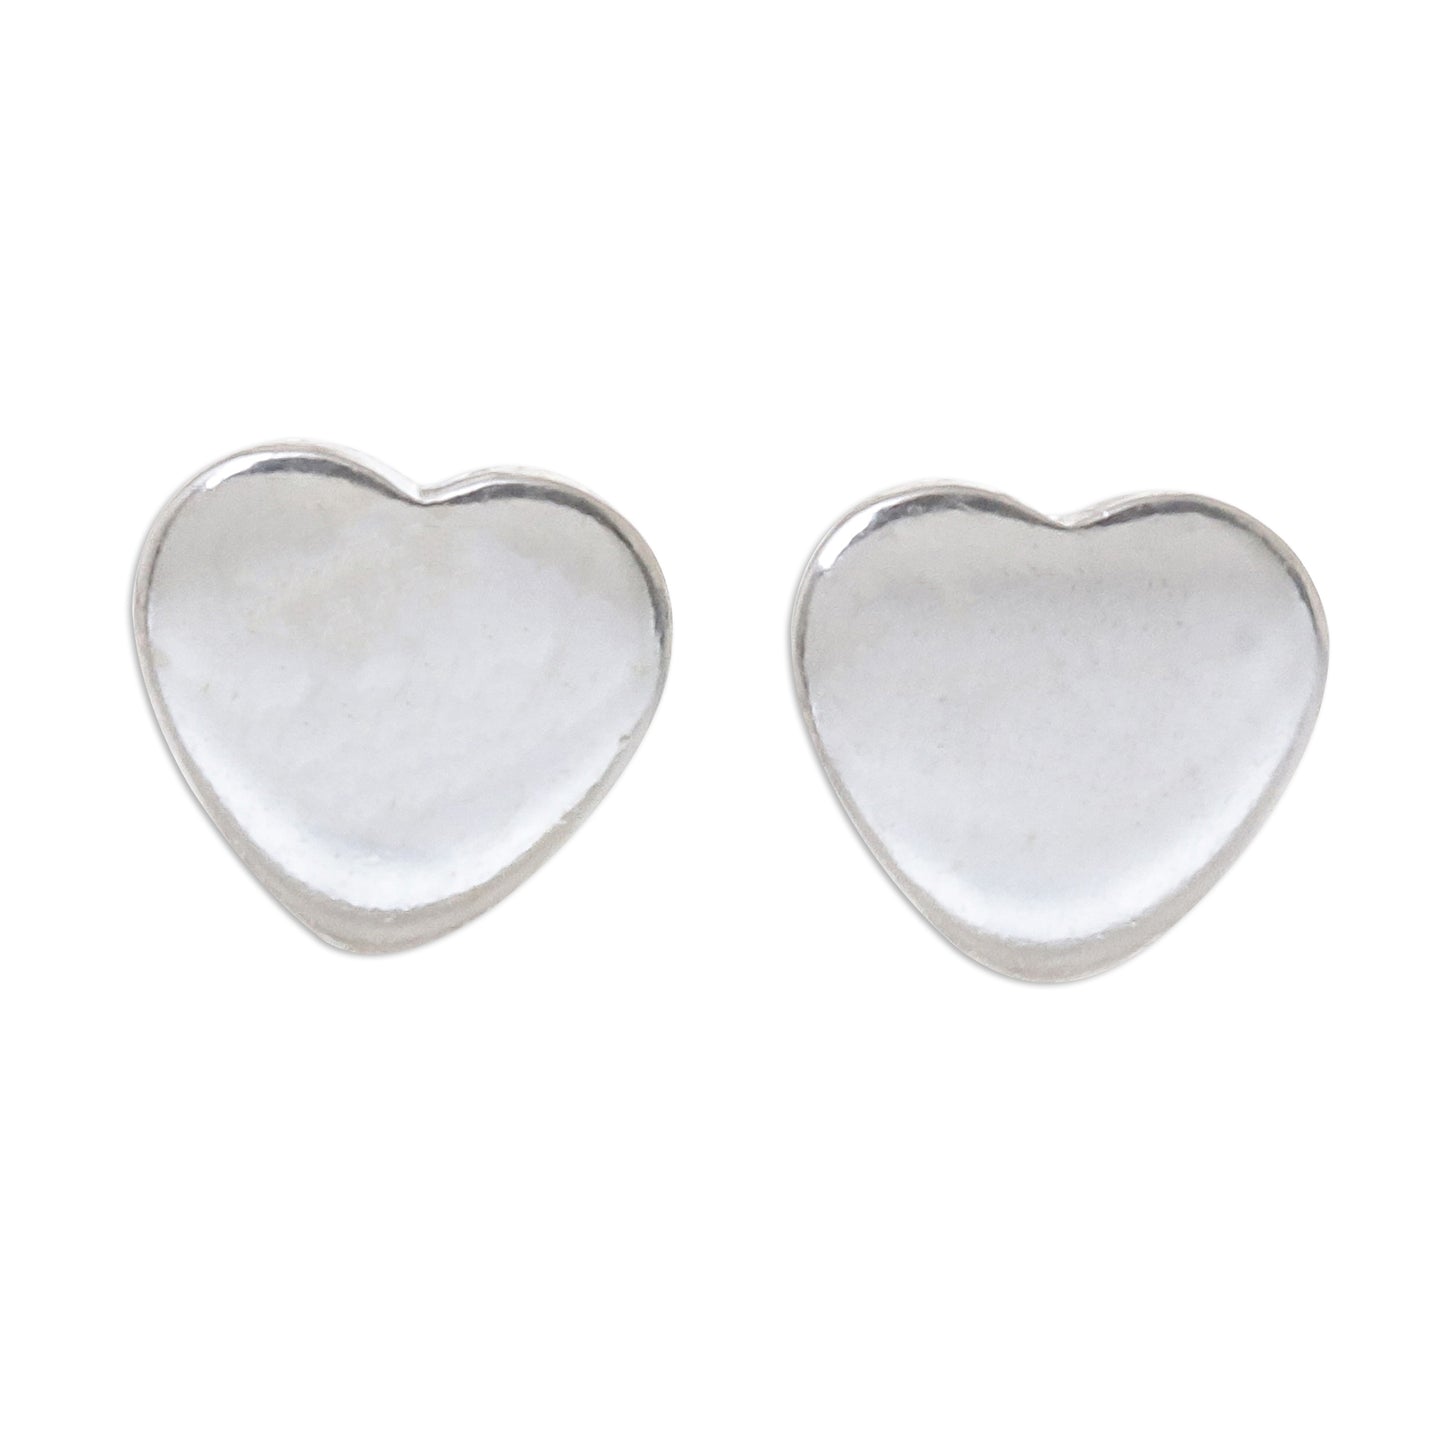 Simple Hearts Heart-Shaped Sterling Silver Stud Earrings from Thailand